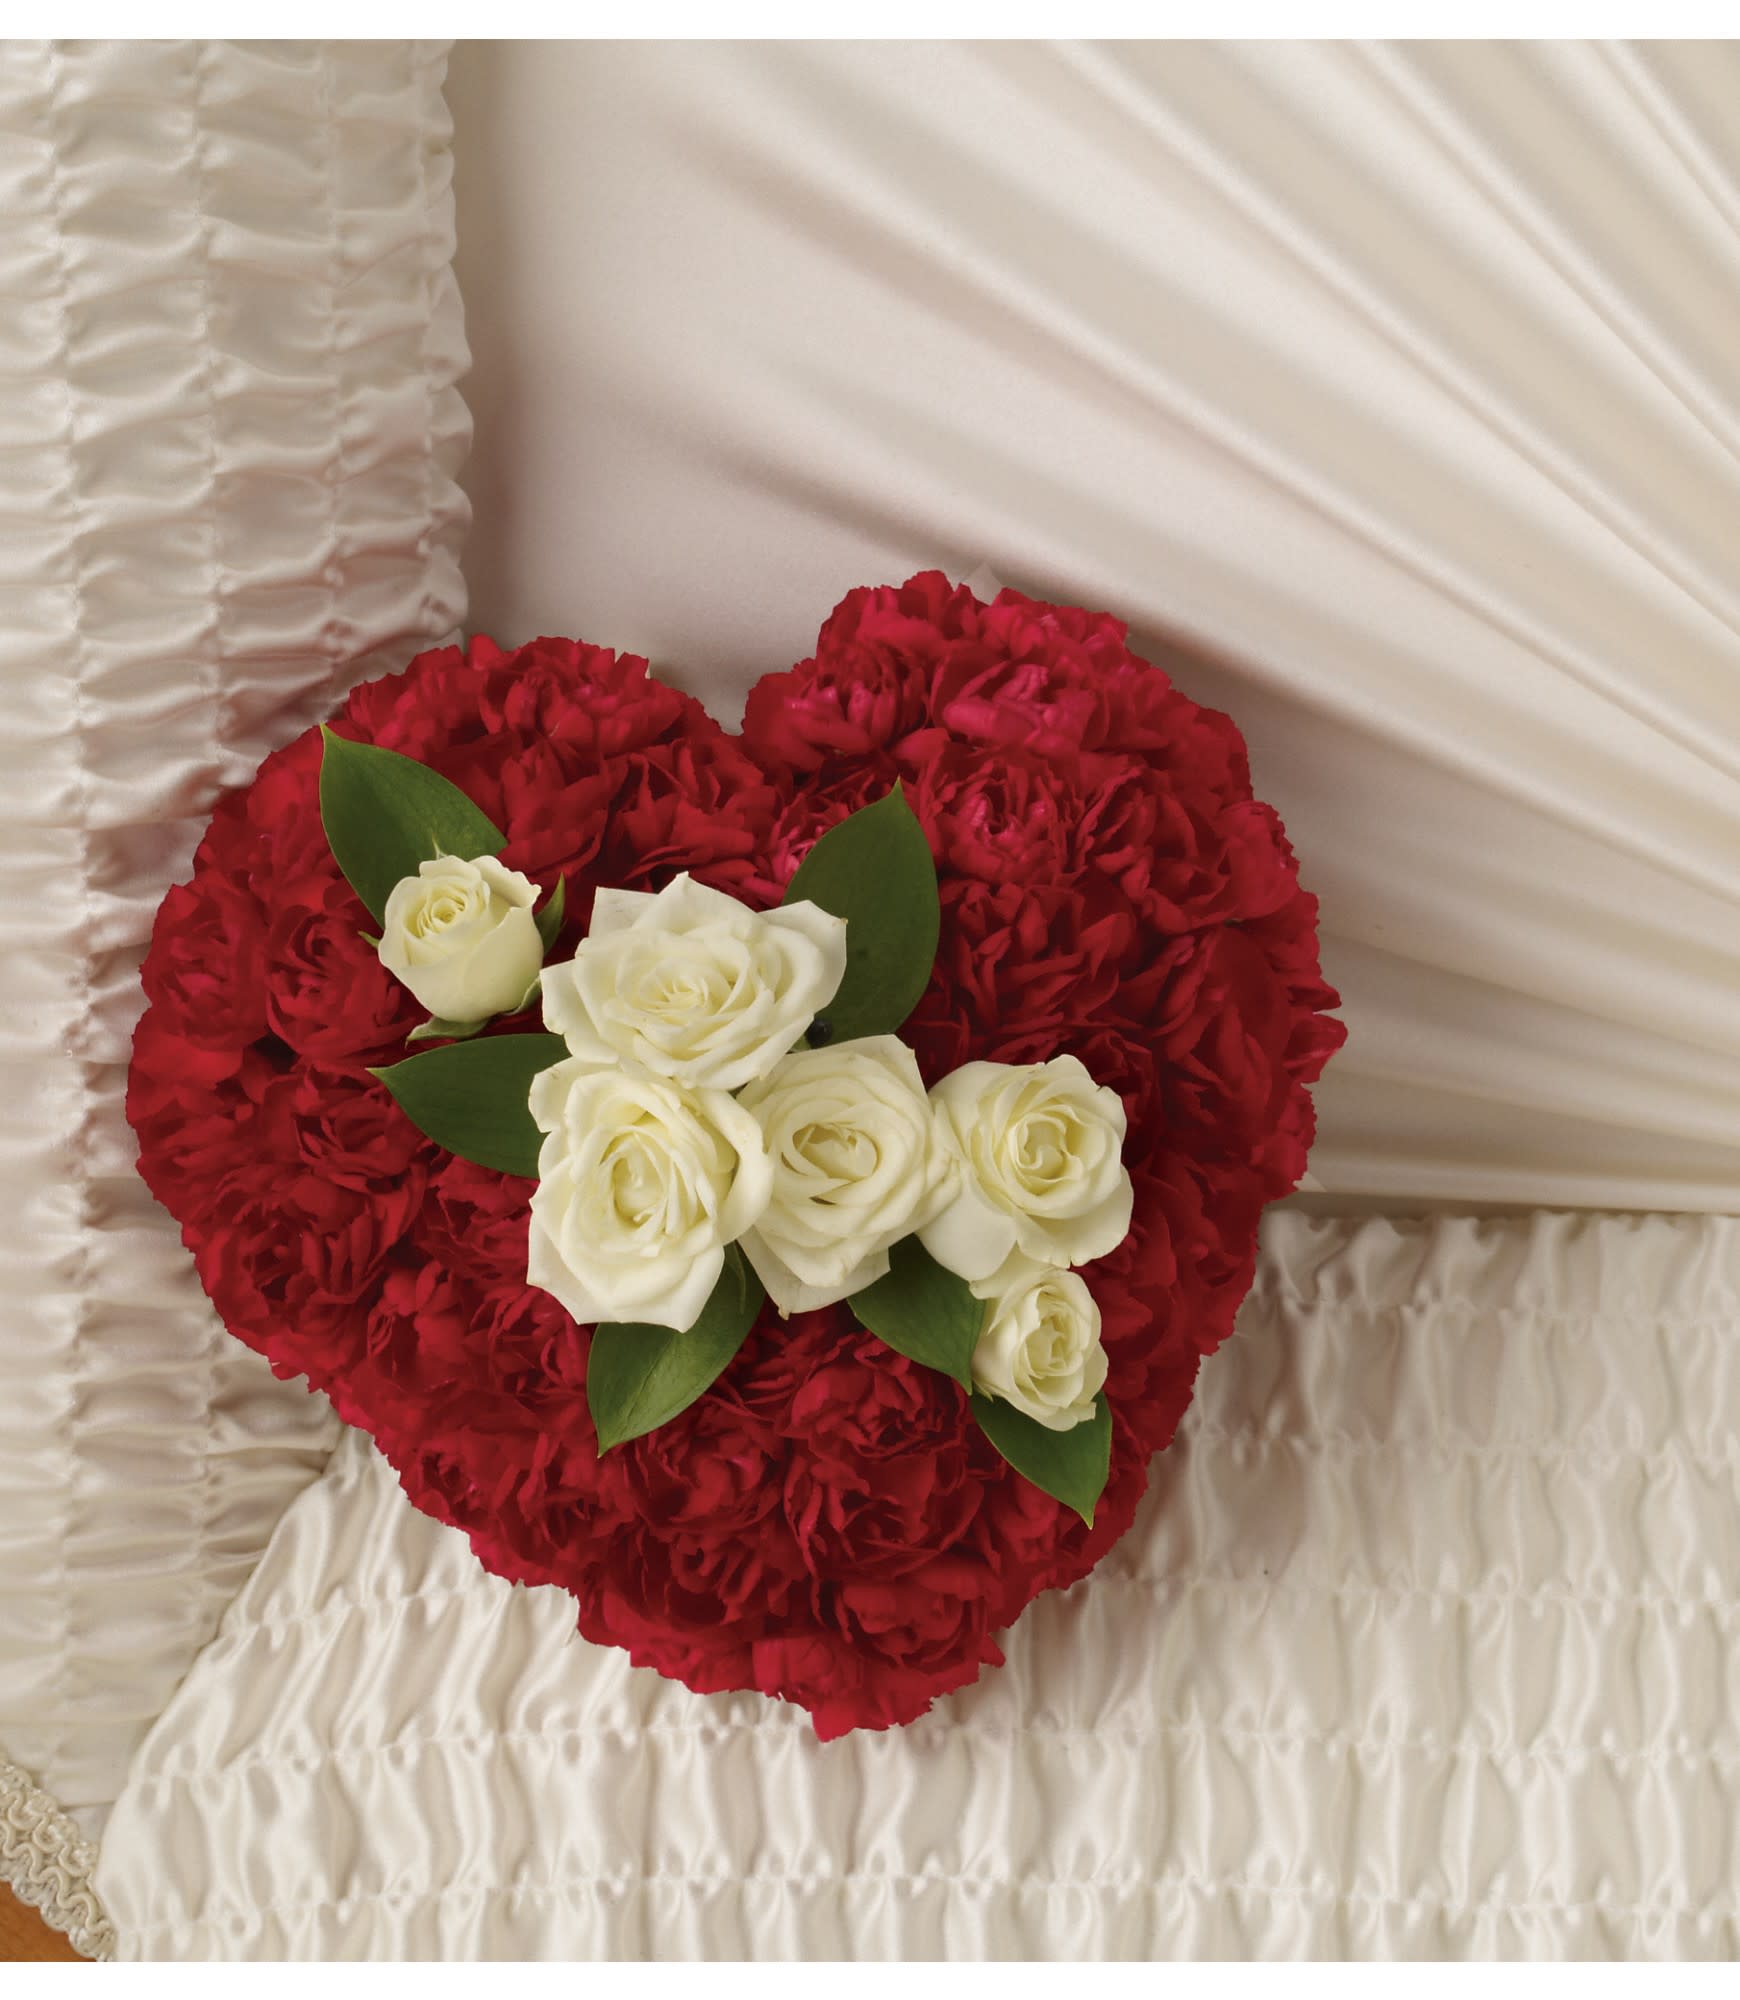 Devoted Heart Casket Insert - Such a simple tribute, this lovely casket heart of red carnations accented with white roses. Other color and flower options available- A slightly larger open heart is our more popular version- please call for options and for banner.